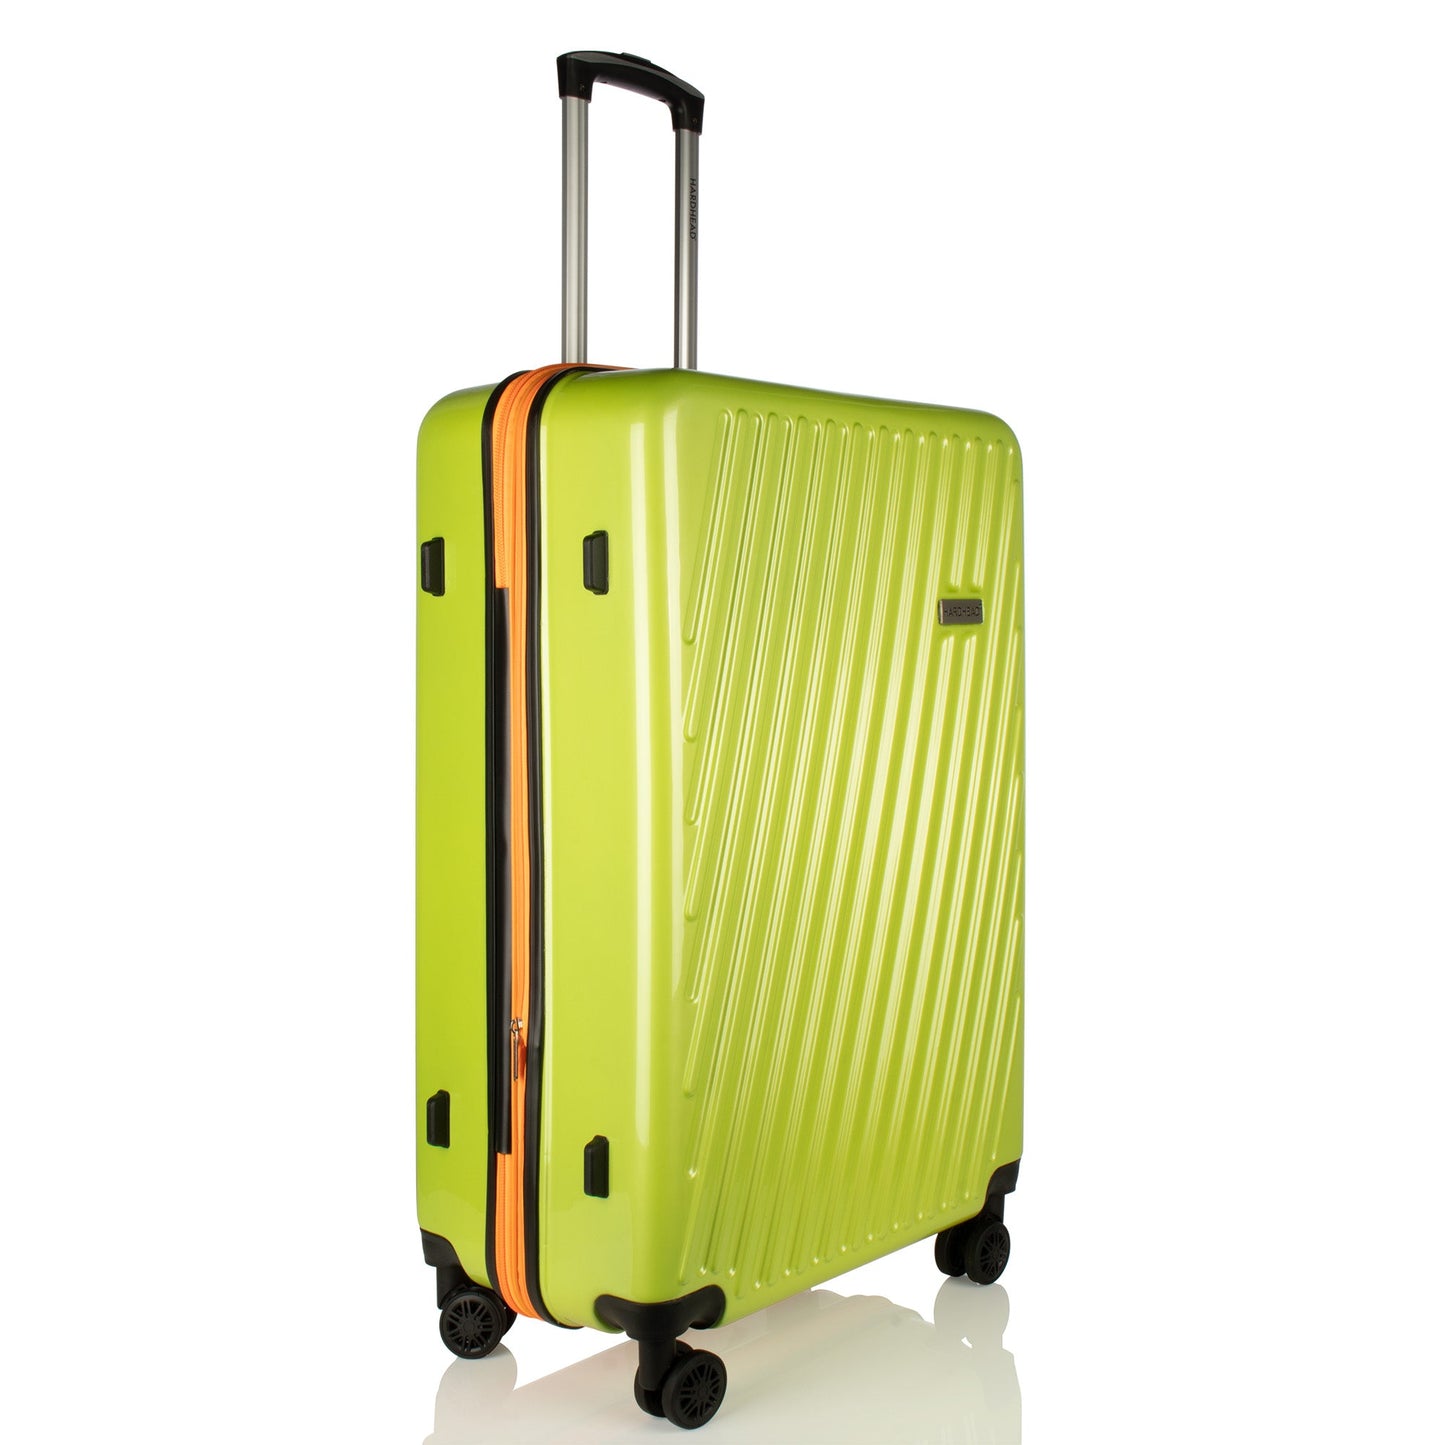 Denisse Collection Green Luggage (21/25/29") Suitcase Lock Spinner Hardshell